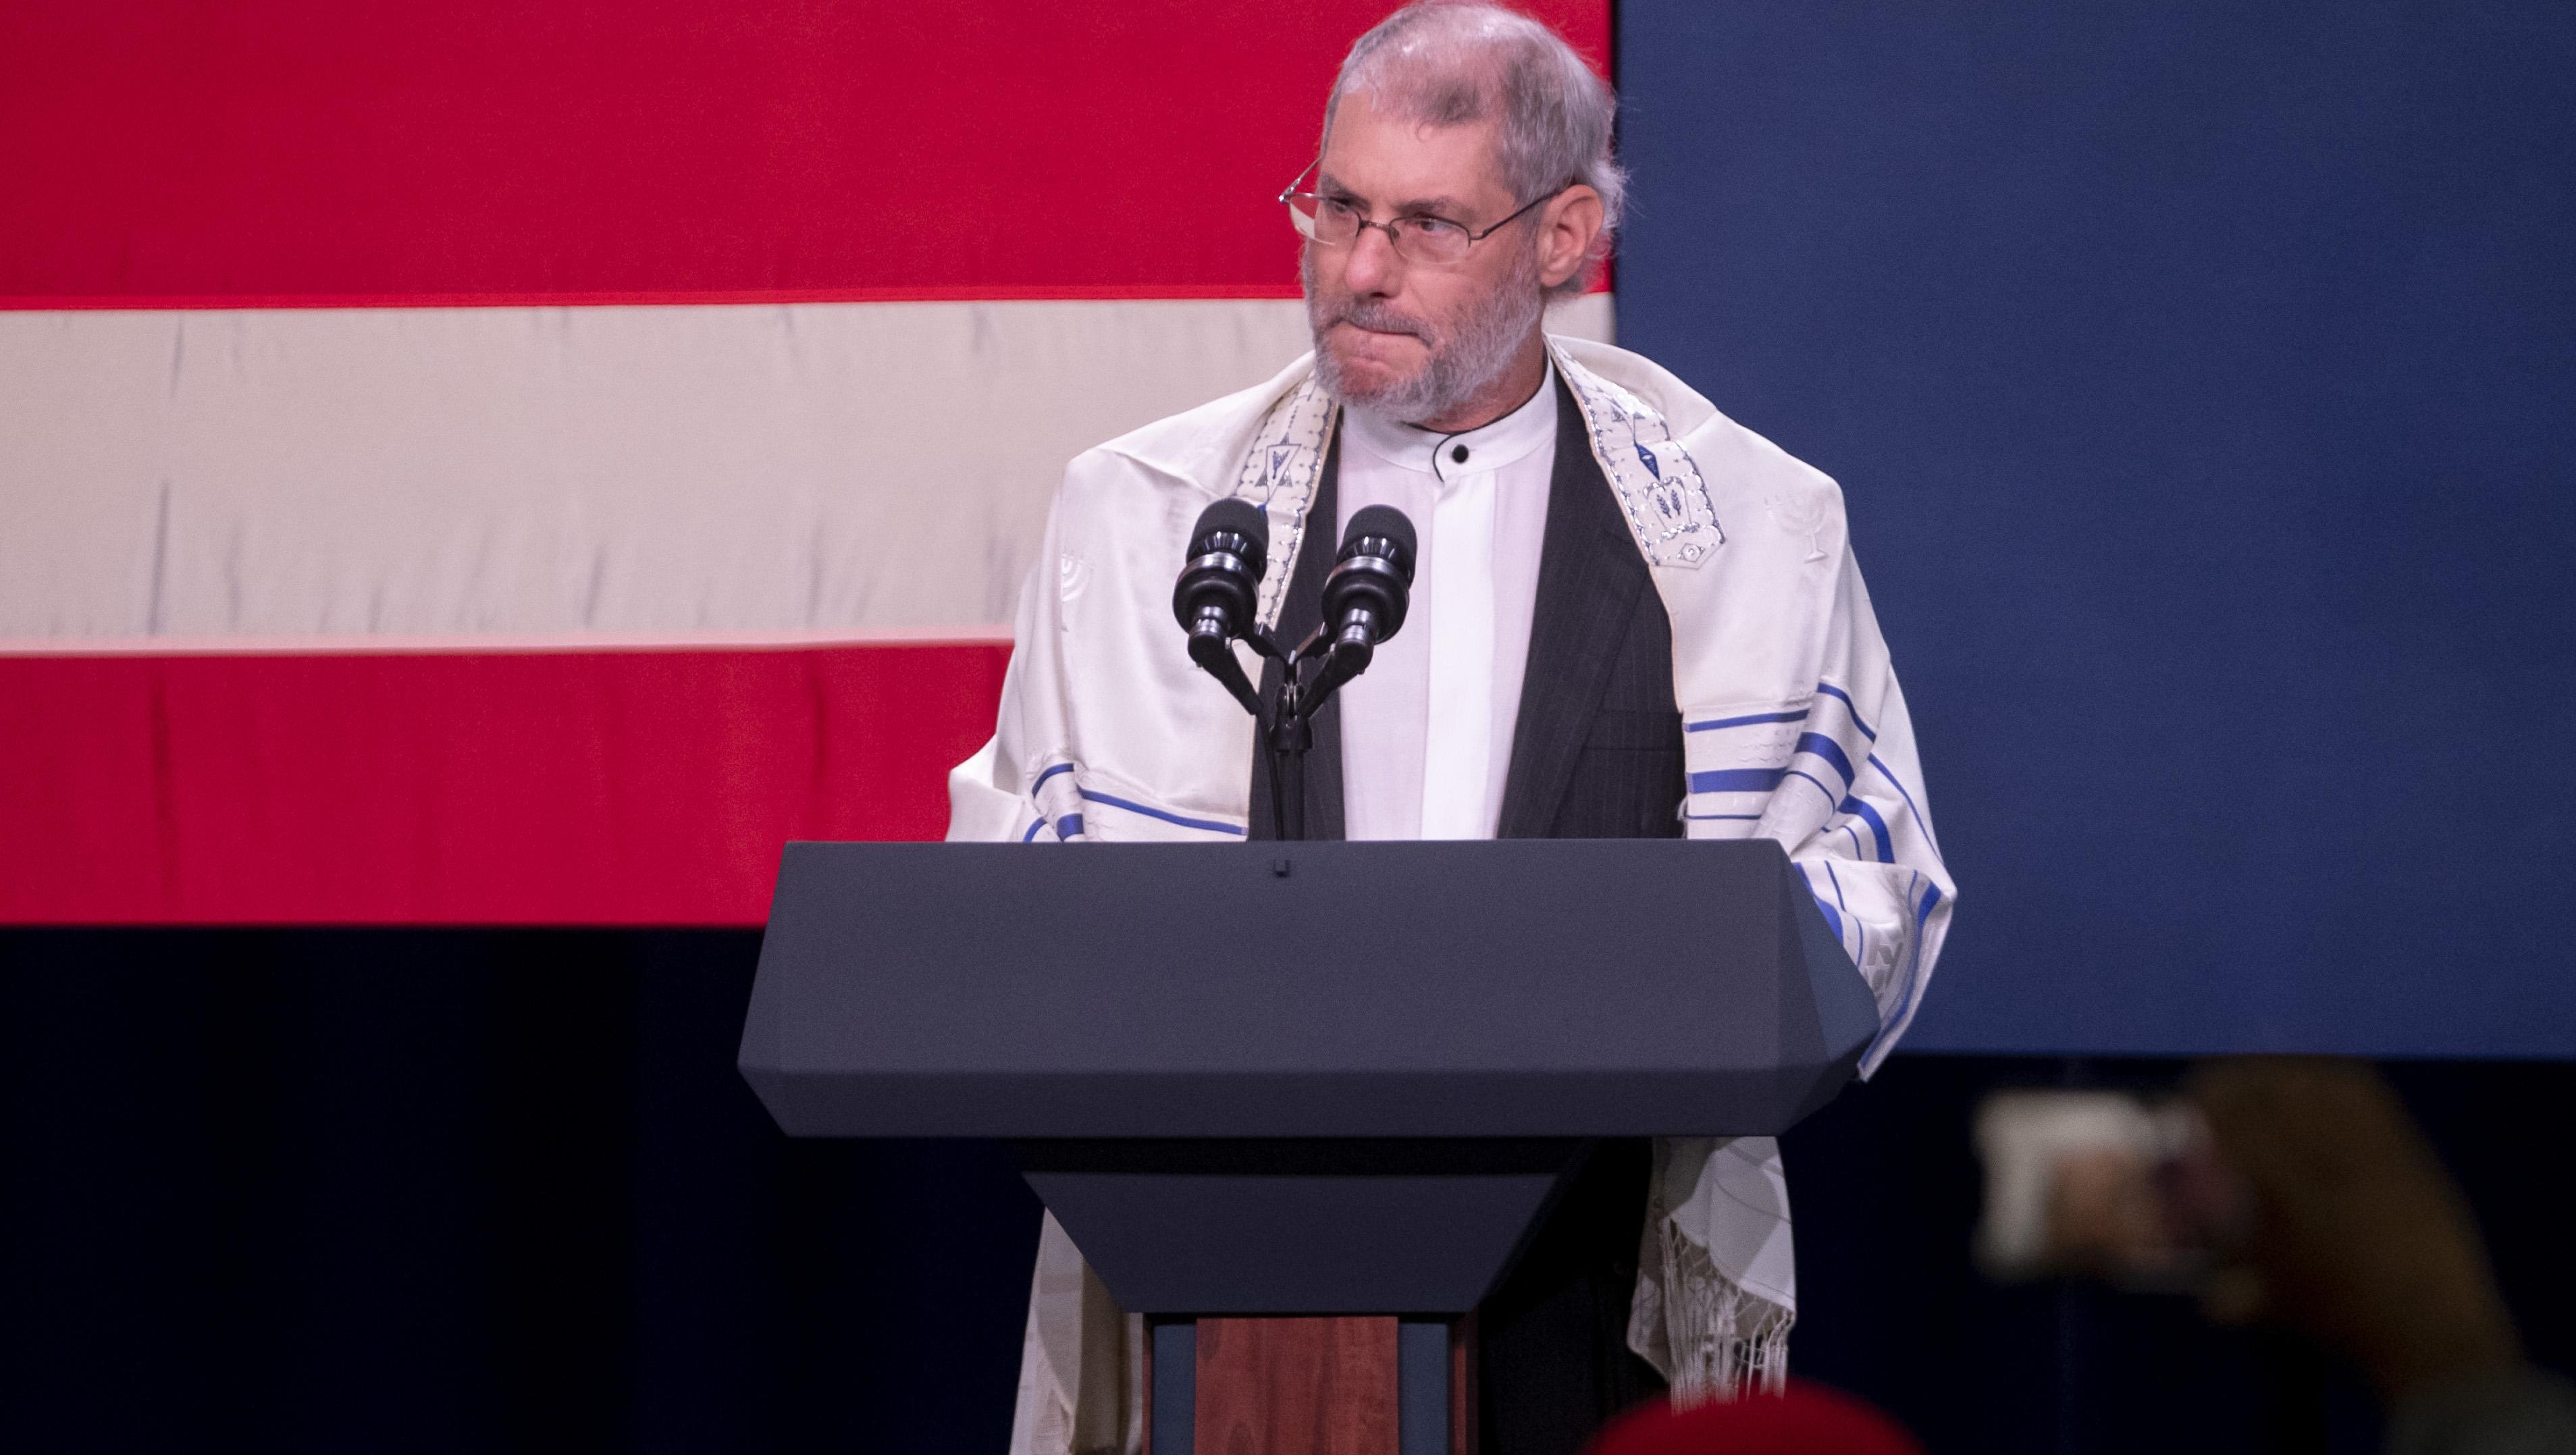 Rabbi Loren Jacobs of Messianic congregation Shema Yisrael in Bloomfield Hills offered a prayer for the victims of the Pittsburgh synagogue massacre. Messianic Jews follow Jewish law but believe that Jesus is the Messiah.